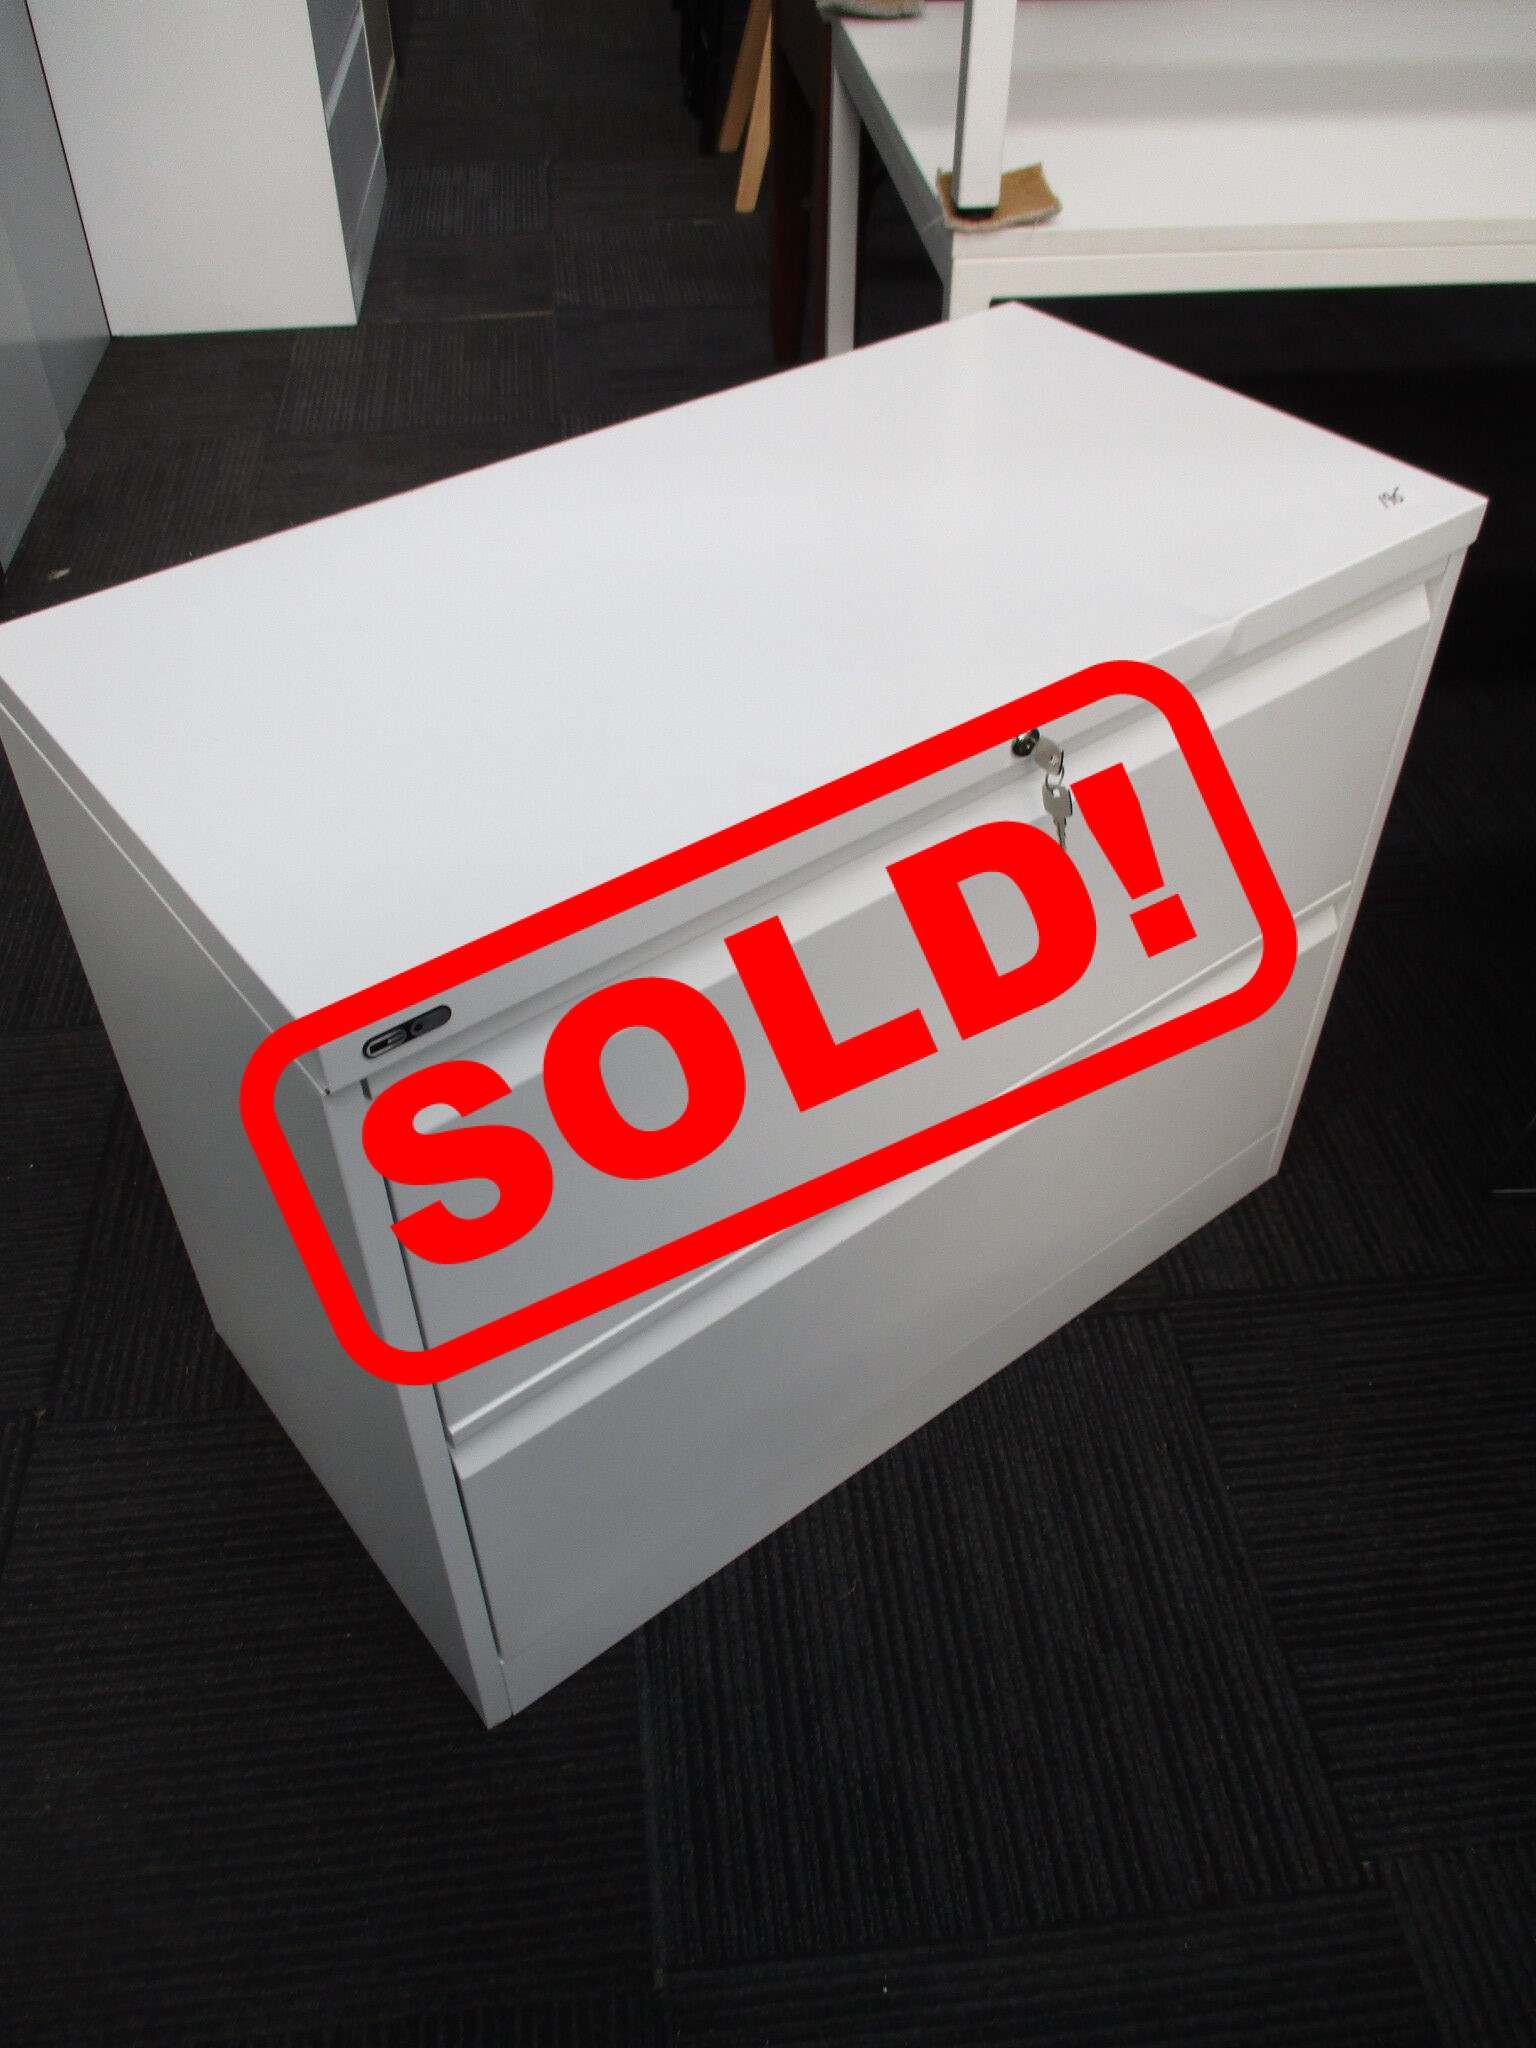 GO 2 Drawer Lateral Filing Cabinet $190